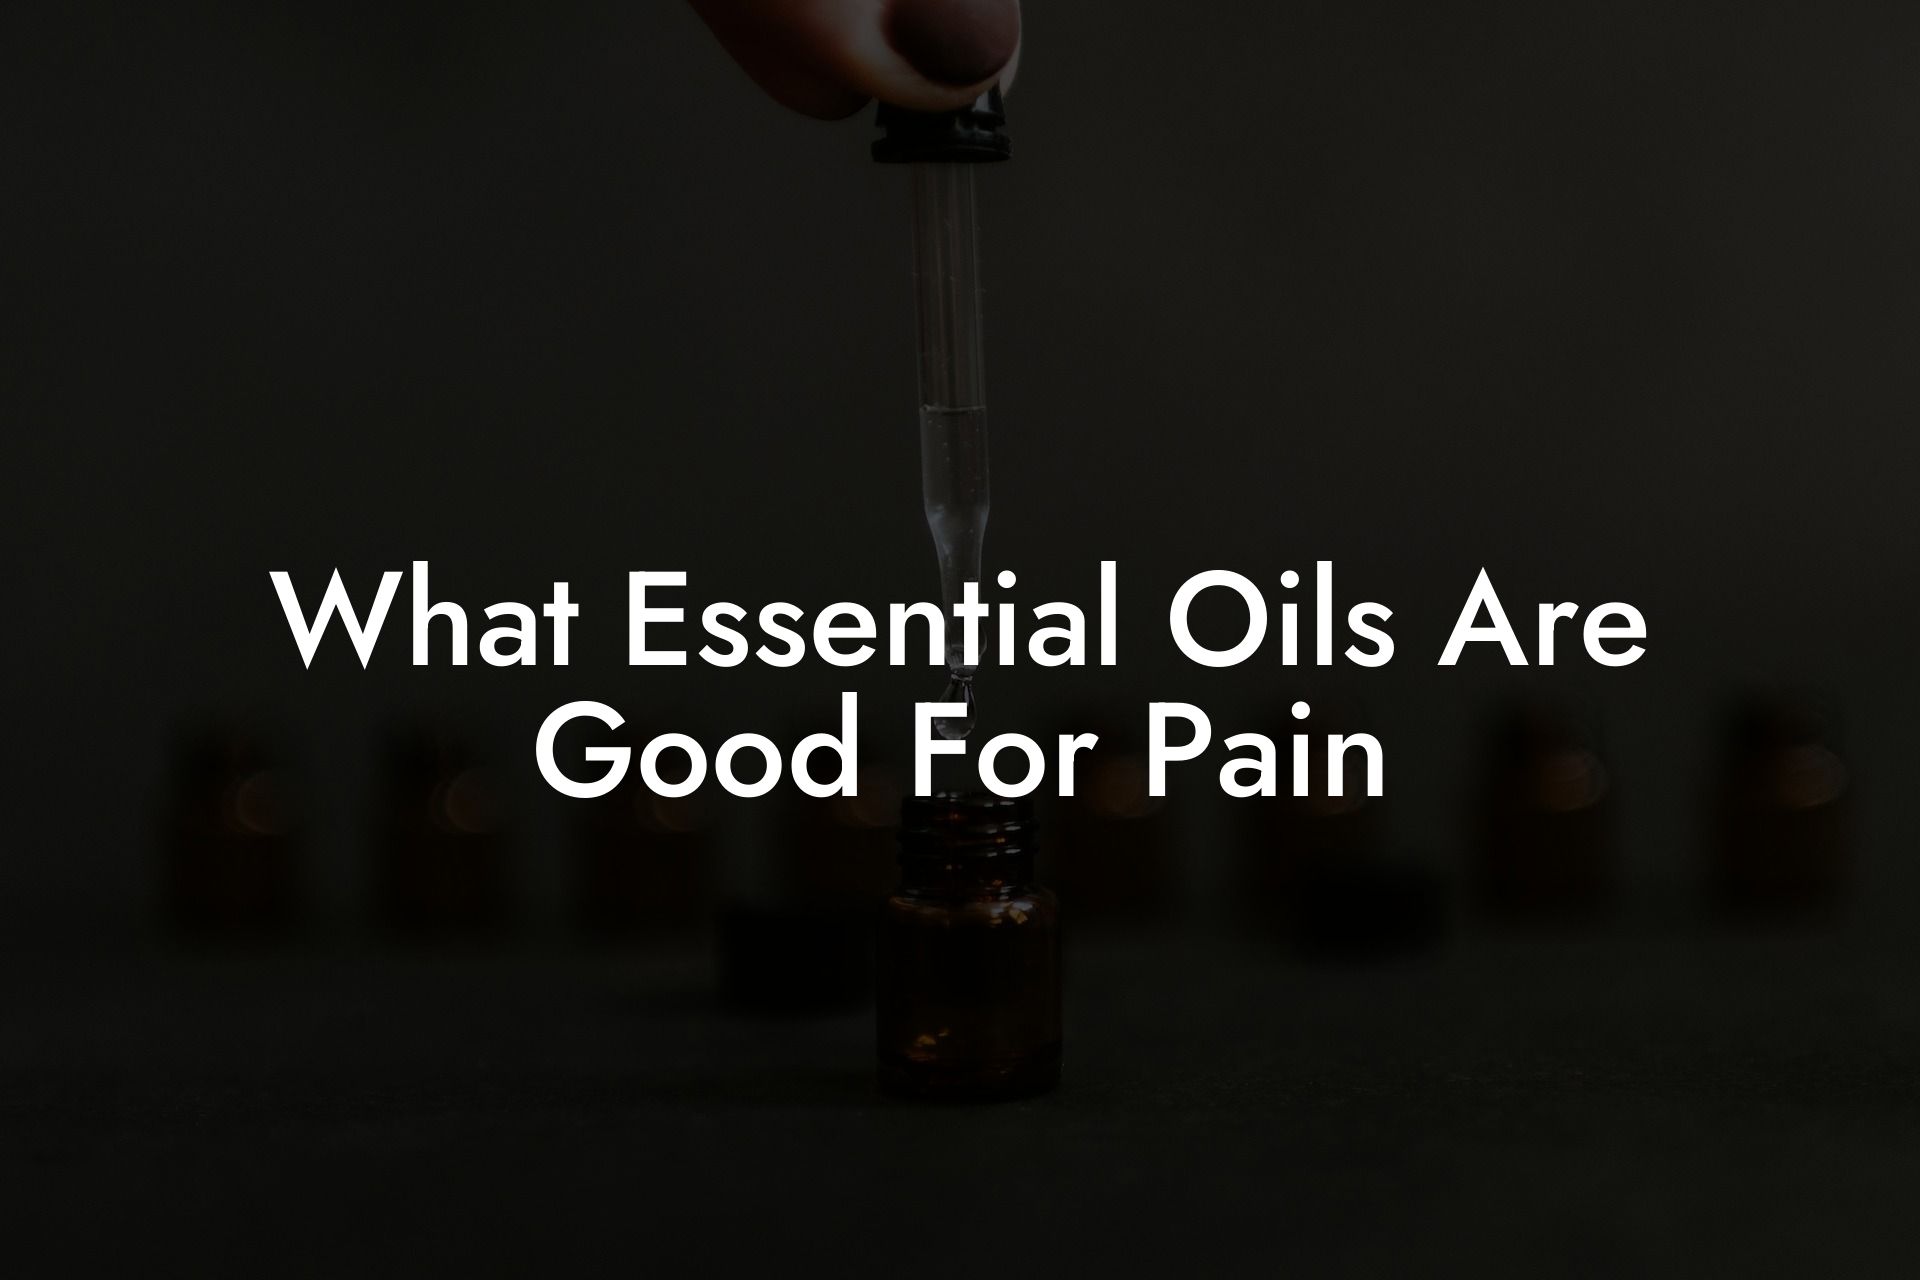 What Essential Oils Are Good For Pain